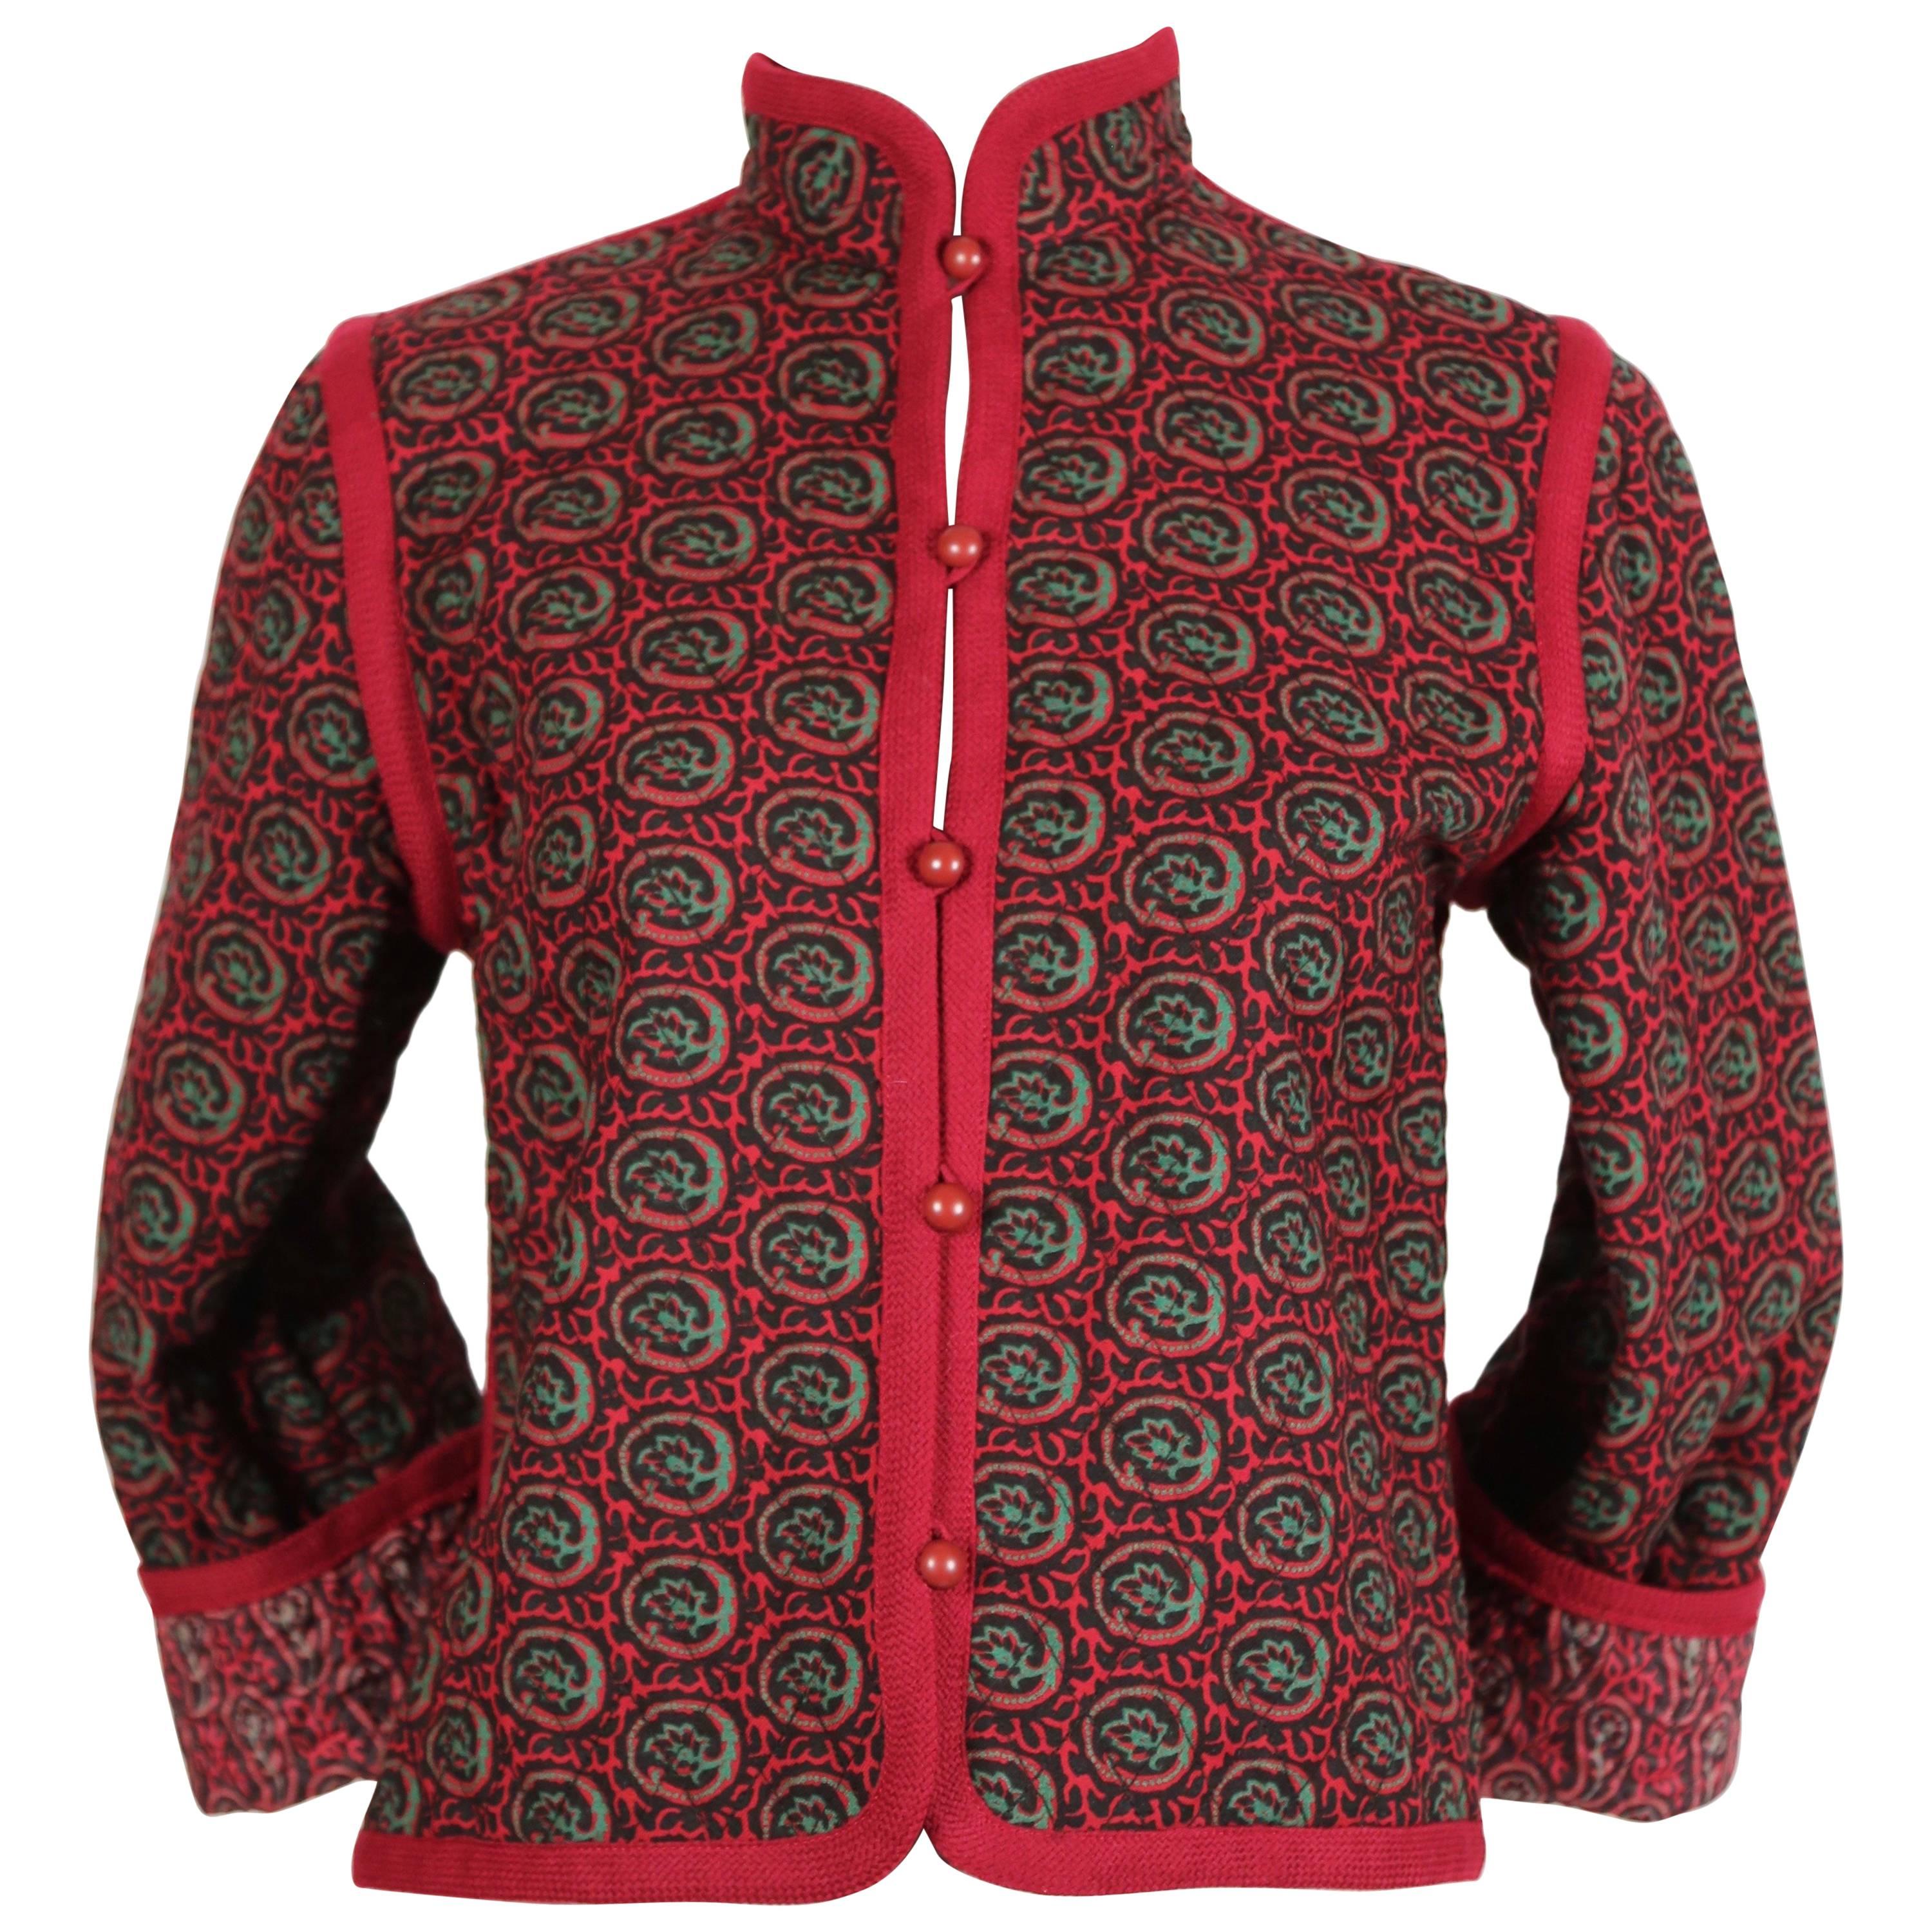 Yves Saint Laurent quilted floral peasant jacket, 1976   